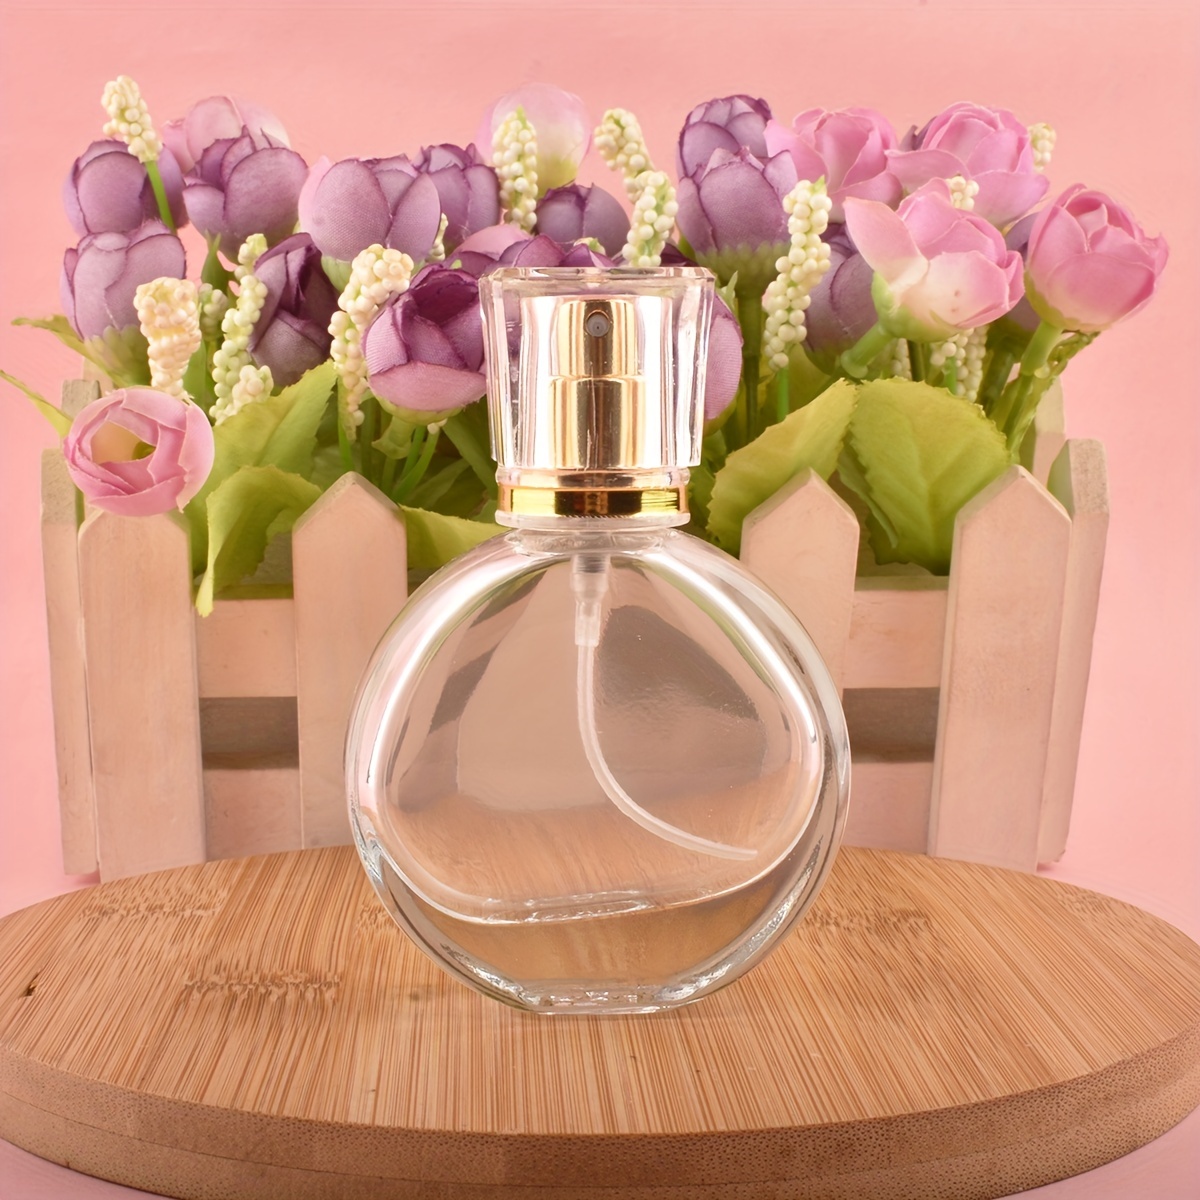 

25ml Flat Round Perfume Spray Bottle Portable Glass Fine Mist Perfume Atomizer Empty Makeup Sample Container Travel Accessories